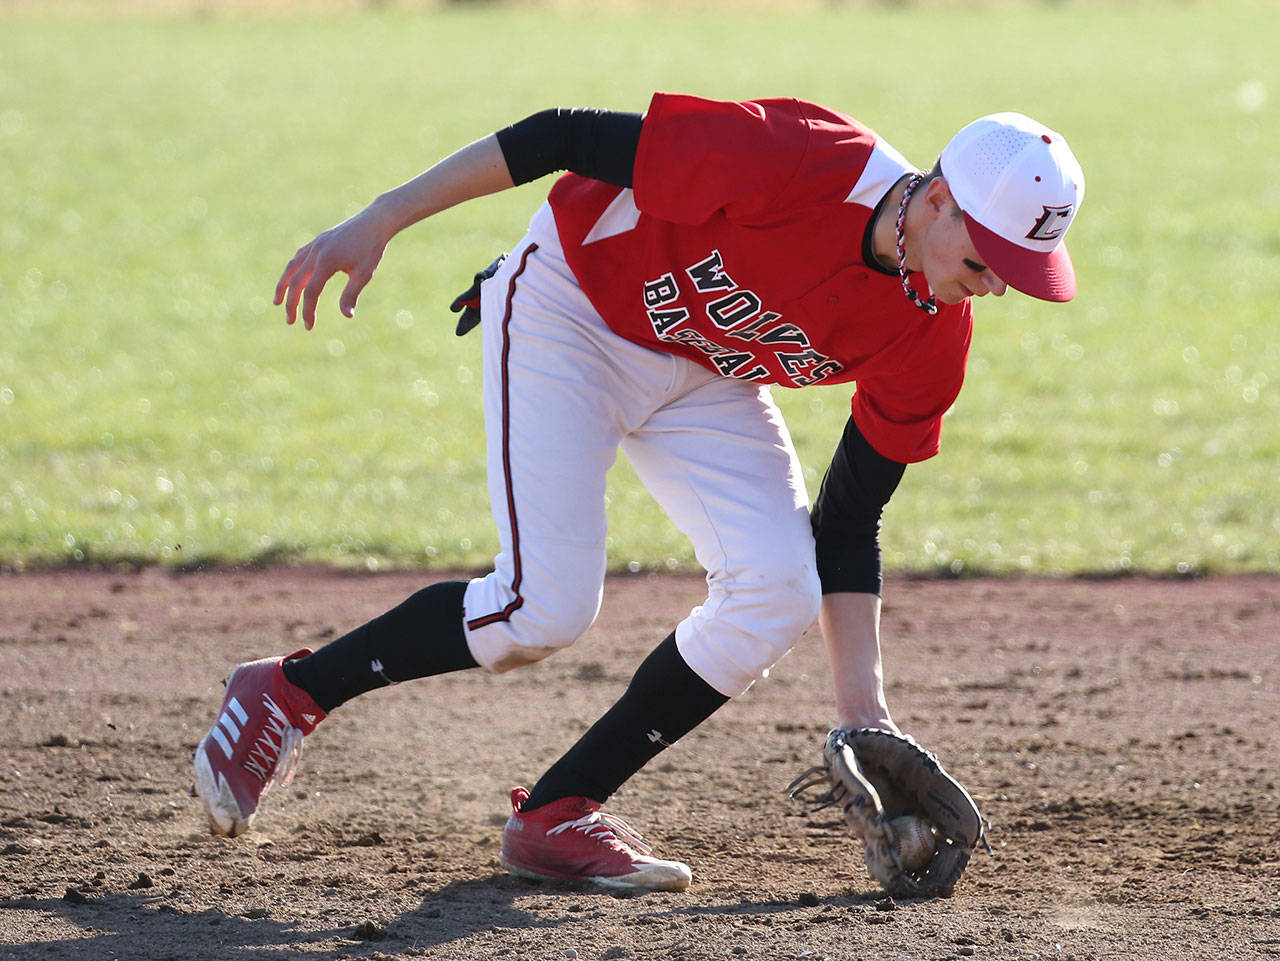 Nick Etzell scoops up a ground ball in Saturday’s win. (Photo by John Fisken)